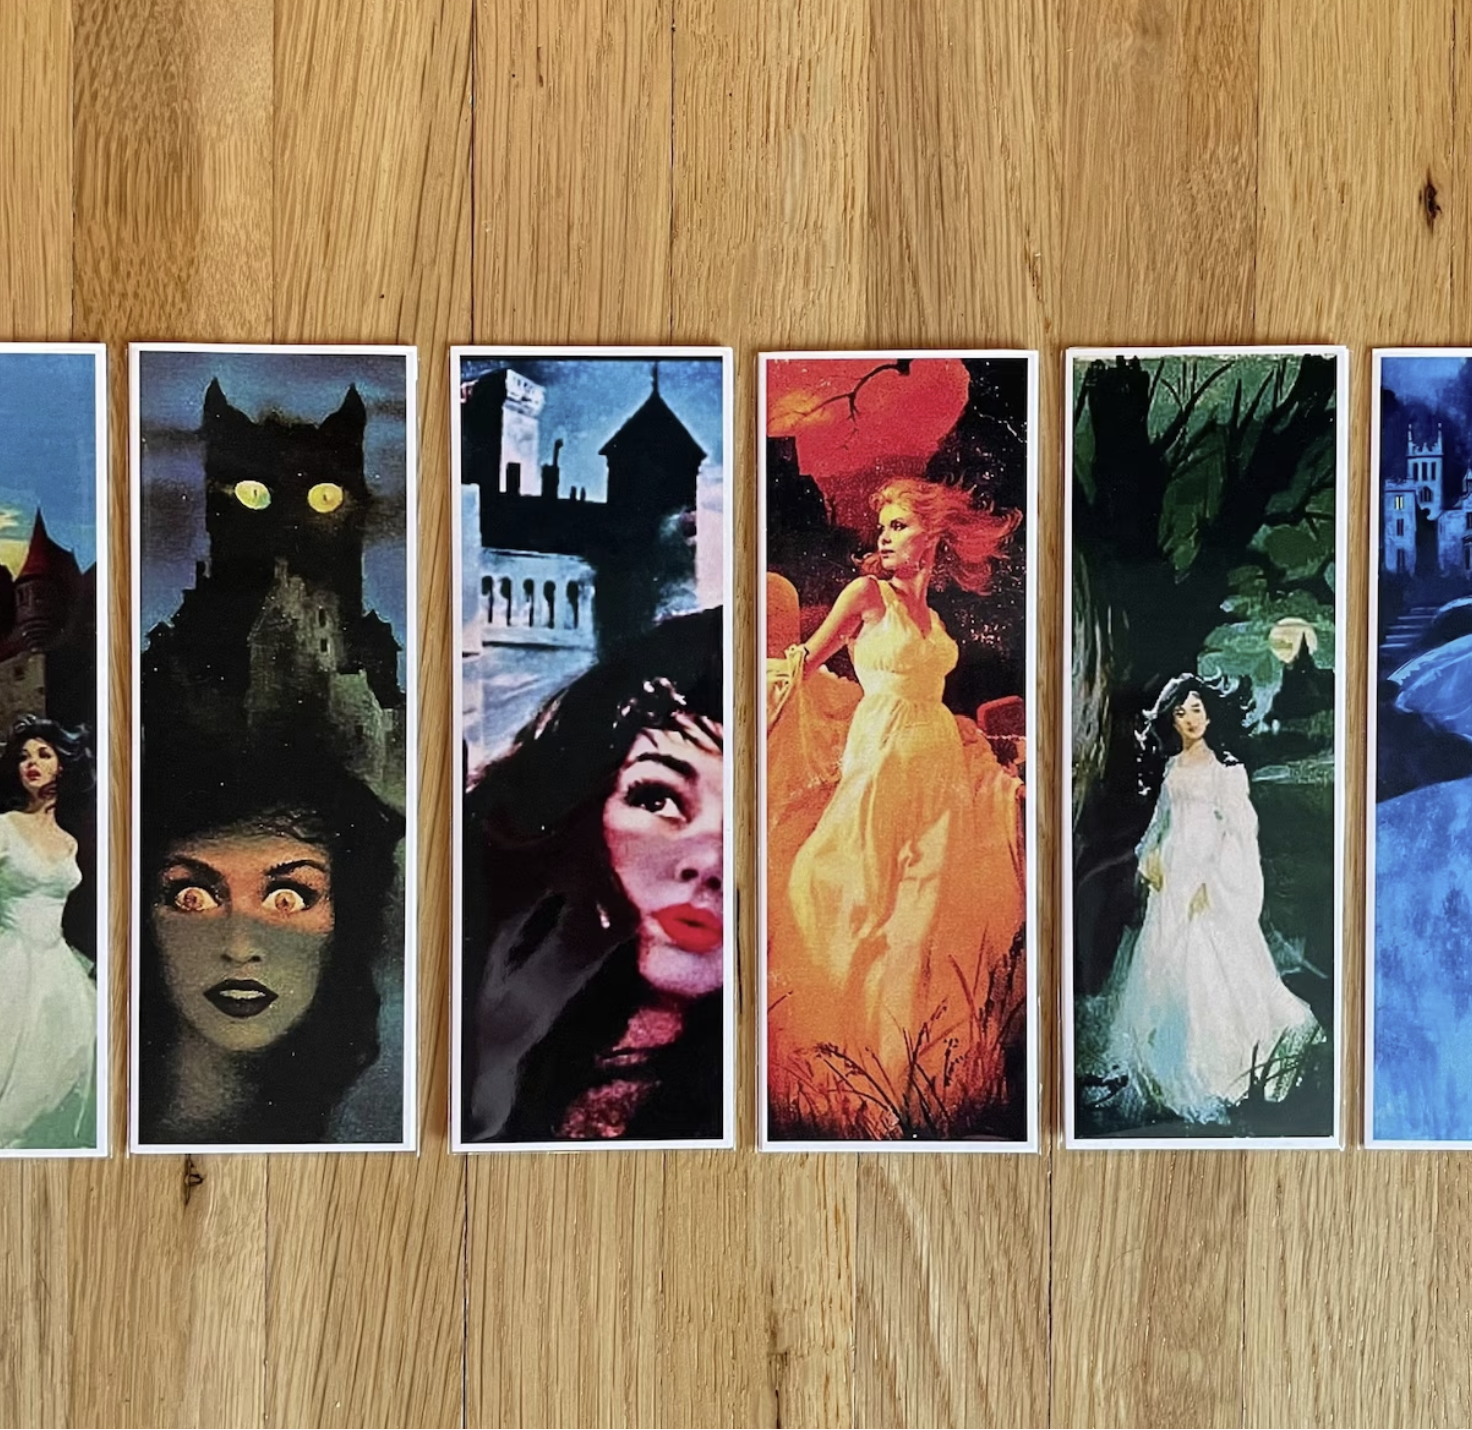 6 bookmarks featuring heroines from vintage gothic romance novels against a light wood background.